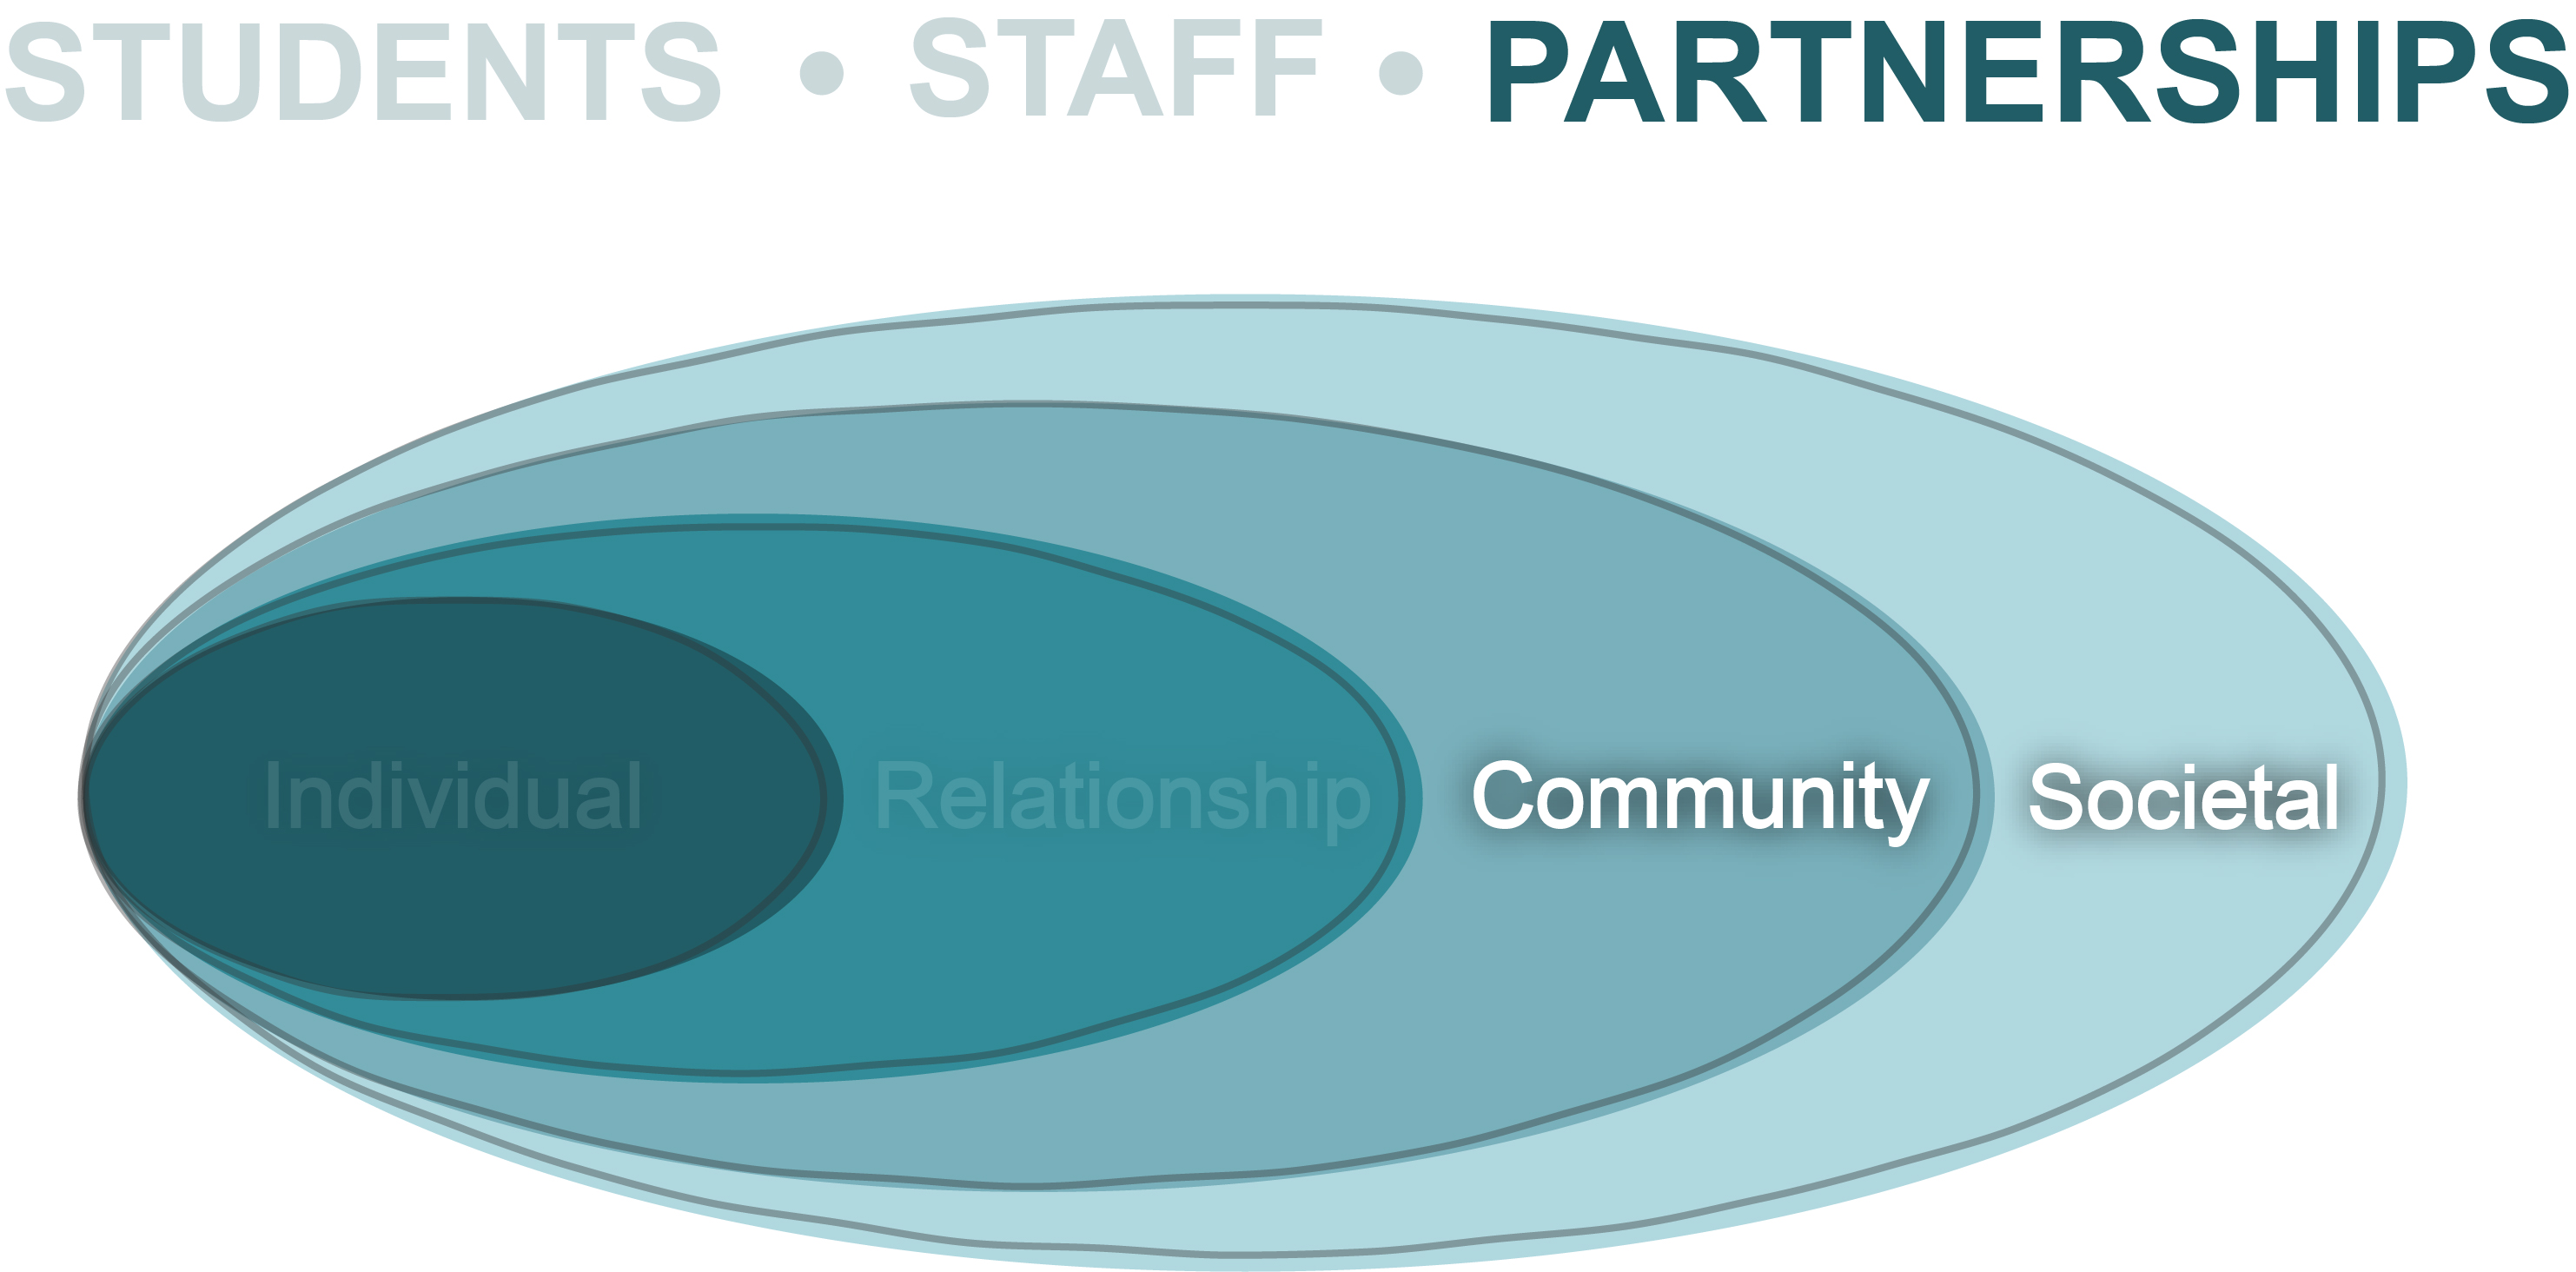 The word "Partnership" and the two largest ovals "Community" & "Societal" are highlighted in the Socioecological Model graphic.